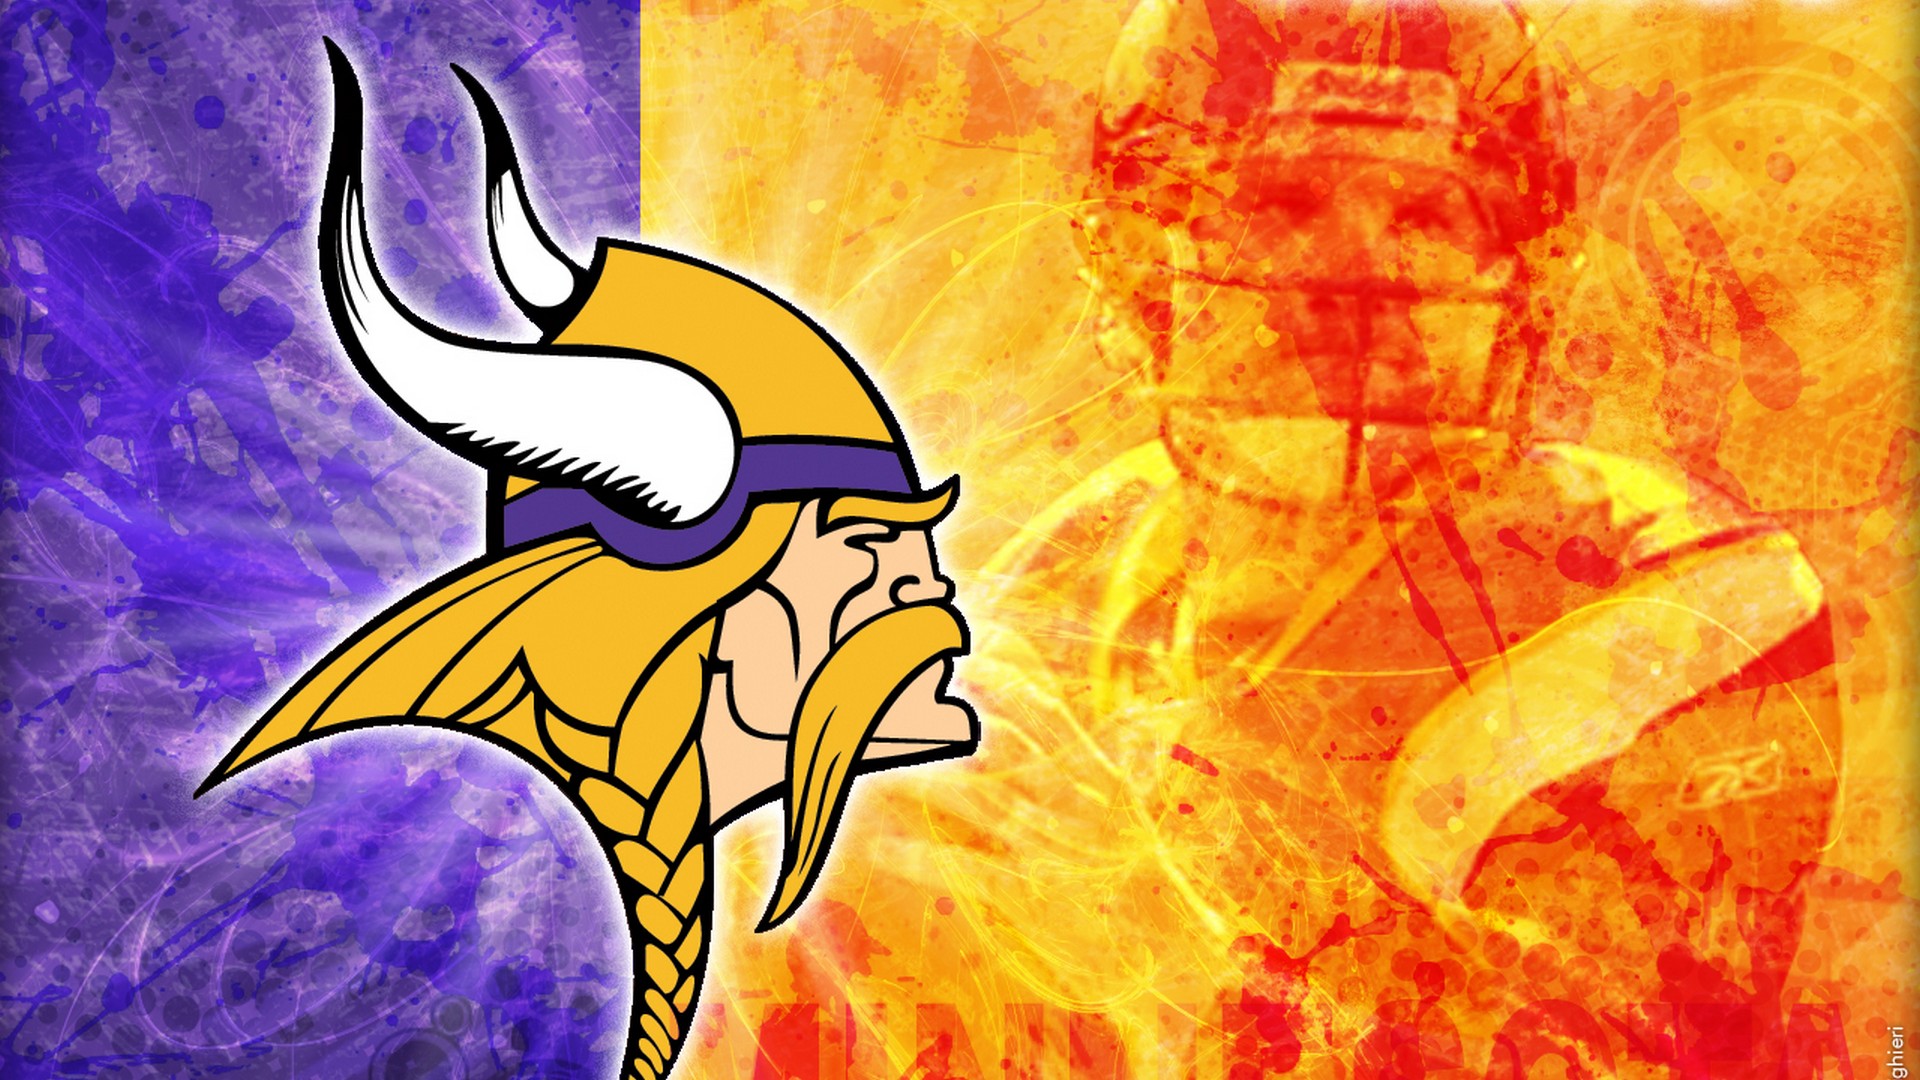 Minnesota Vikings Backgrounds HD With Resolution 1920X1080 pixel. You can make this wallpaper for your Mac or Windows Desktop Background, iPhone, Android or Tablet and another Smartphone device for free